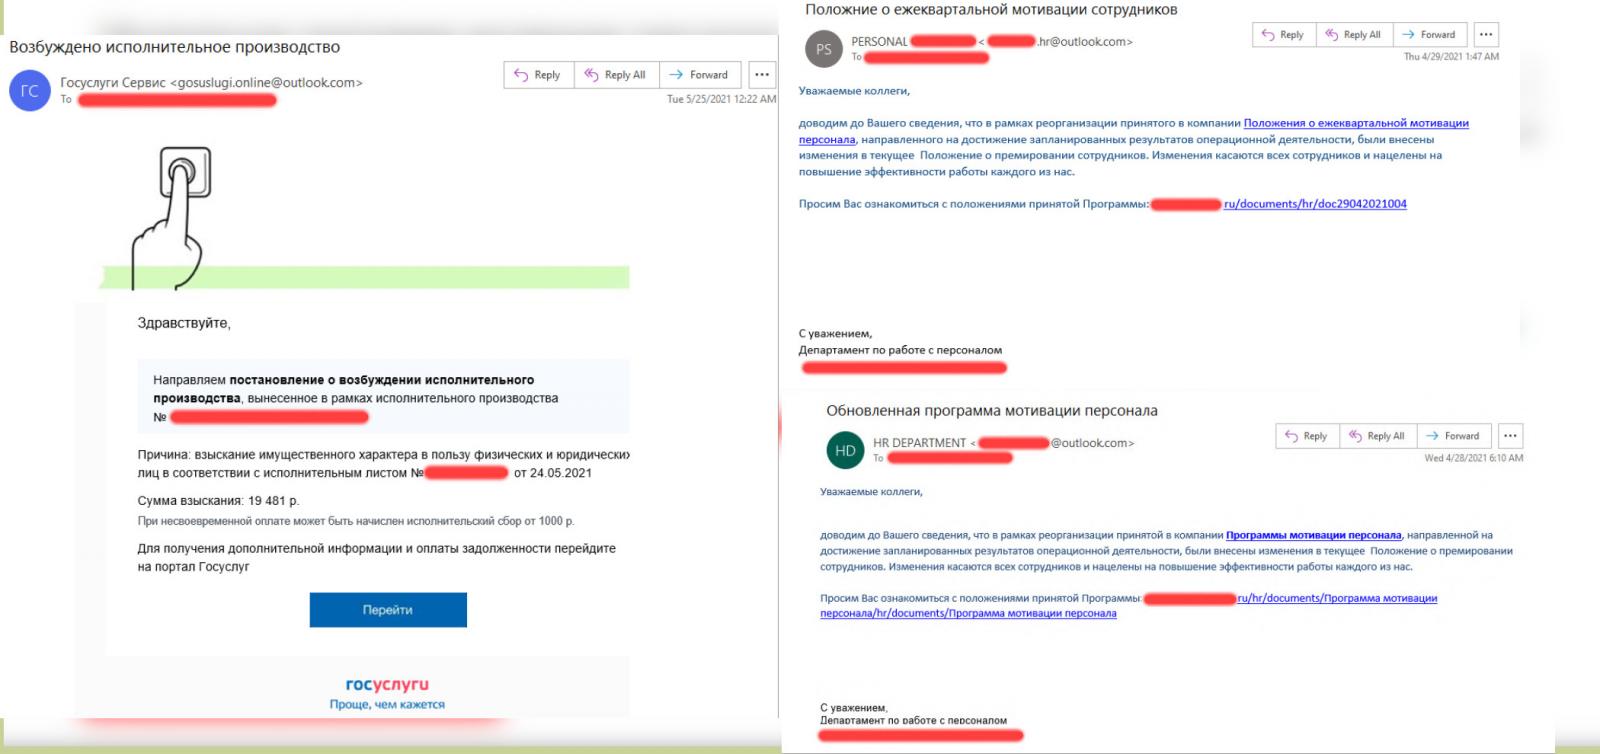 RedCurl spear-phishing emails to a large wholesale company in Russia